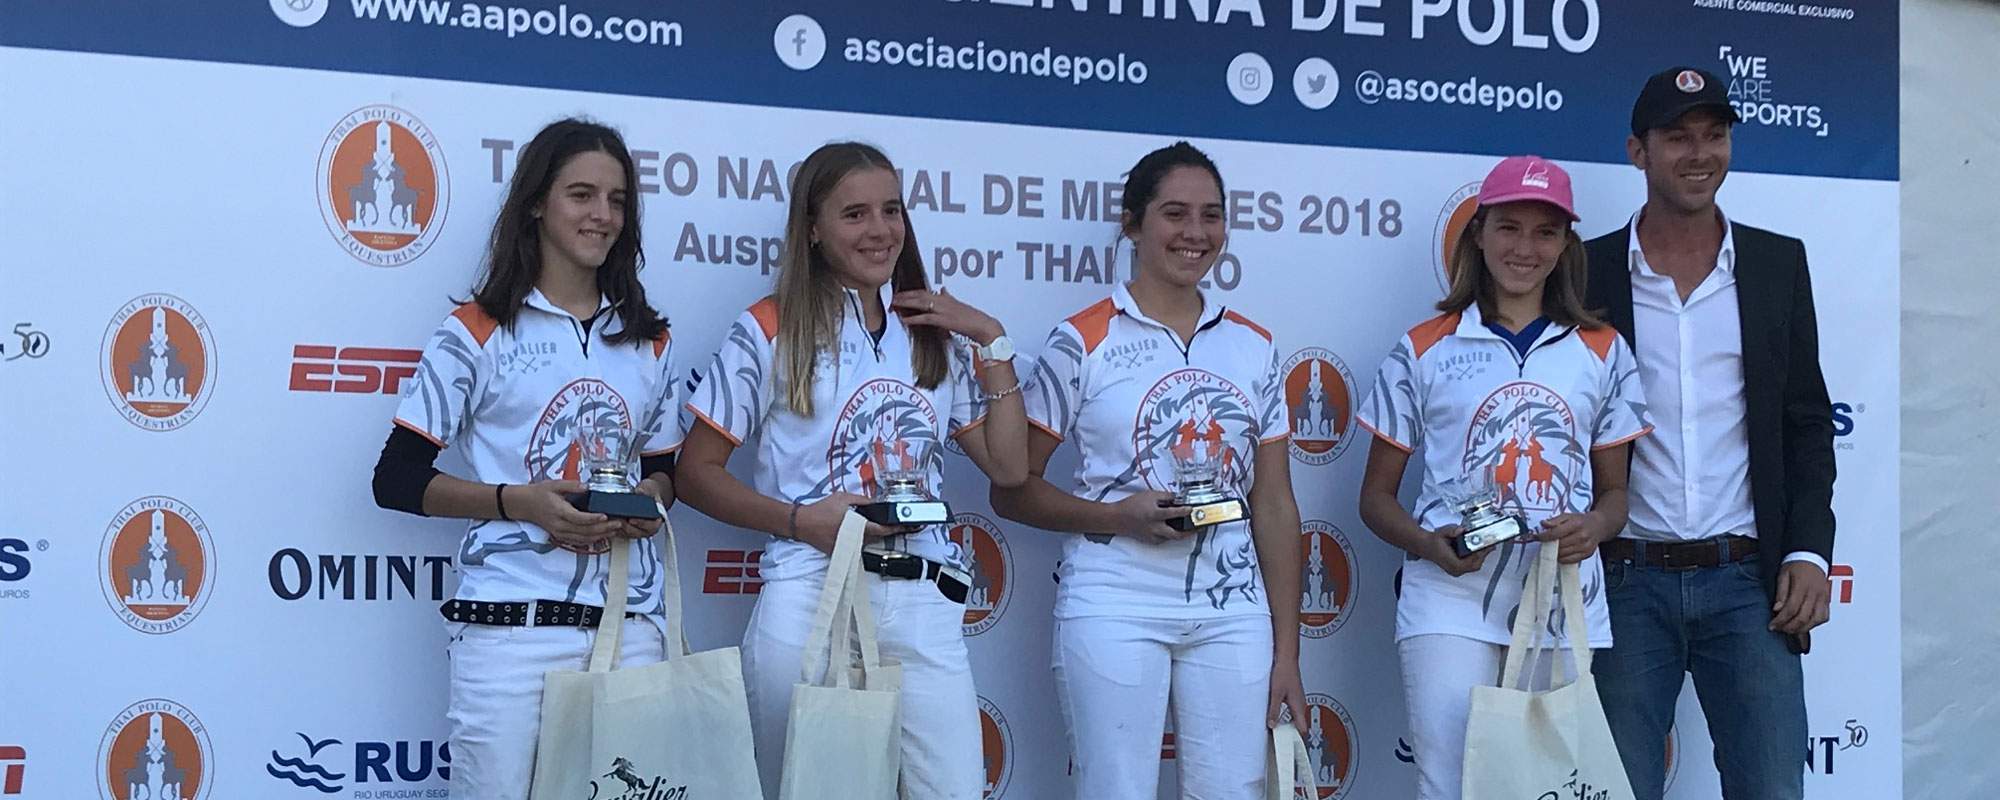 LA SOFIA QUATRO VIENTOS winner of the AAP National Youth Championship 2018 - Category Juvenile Female